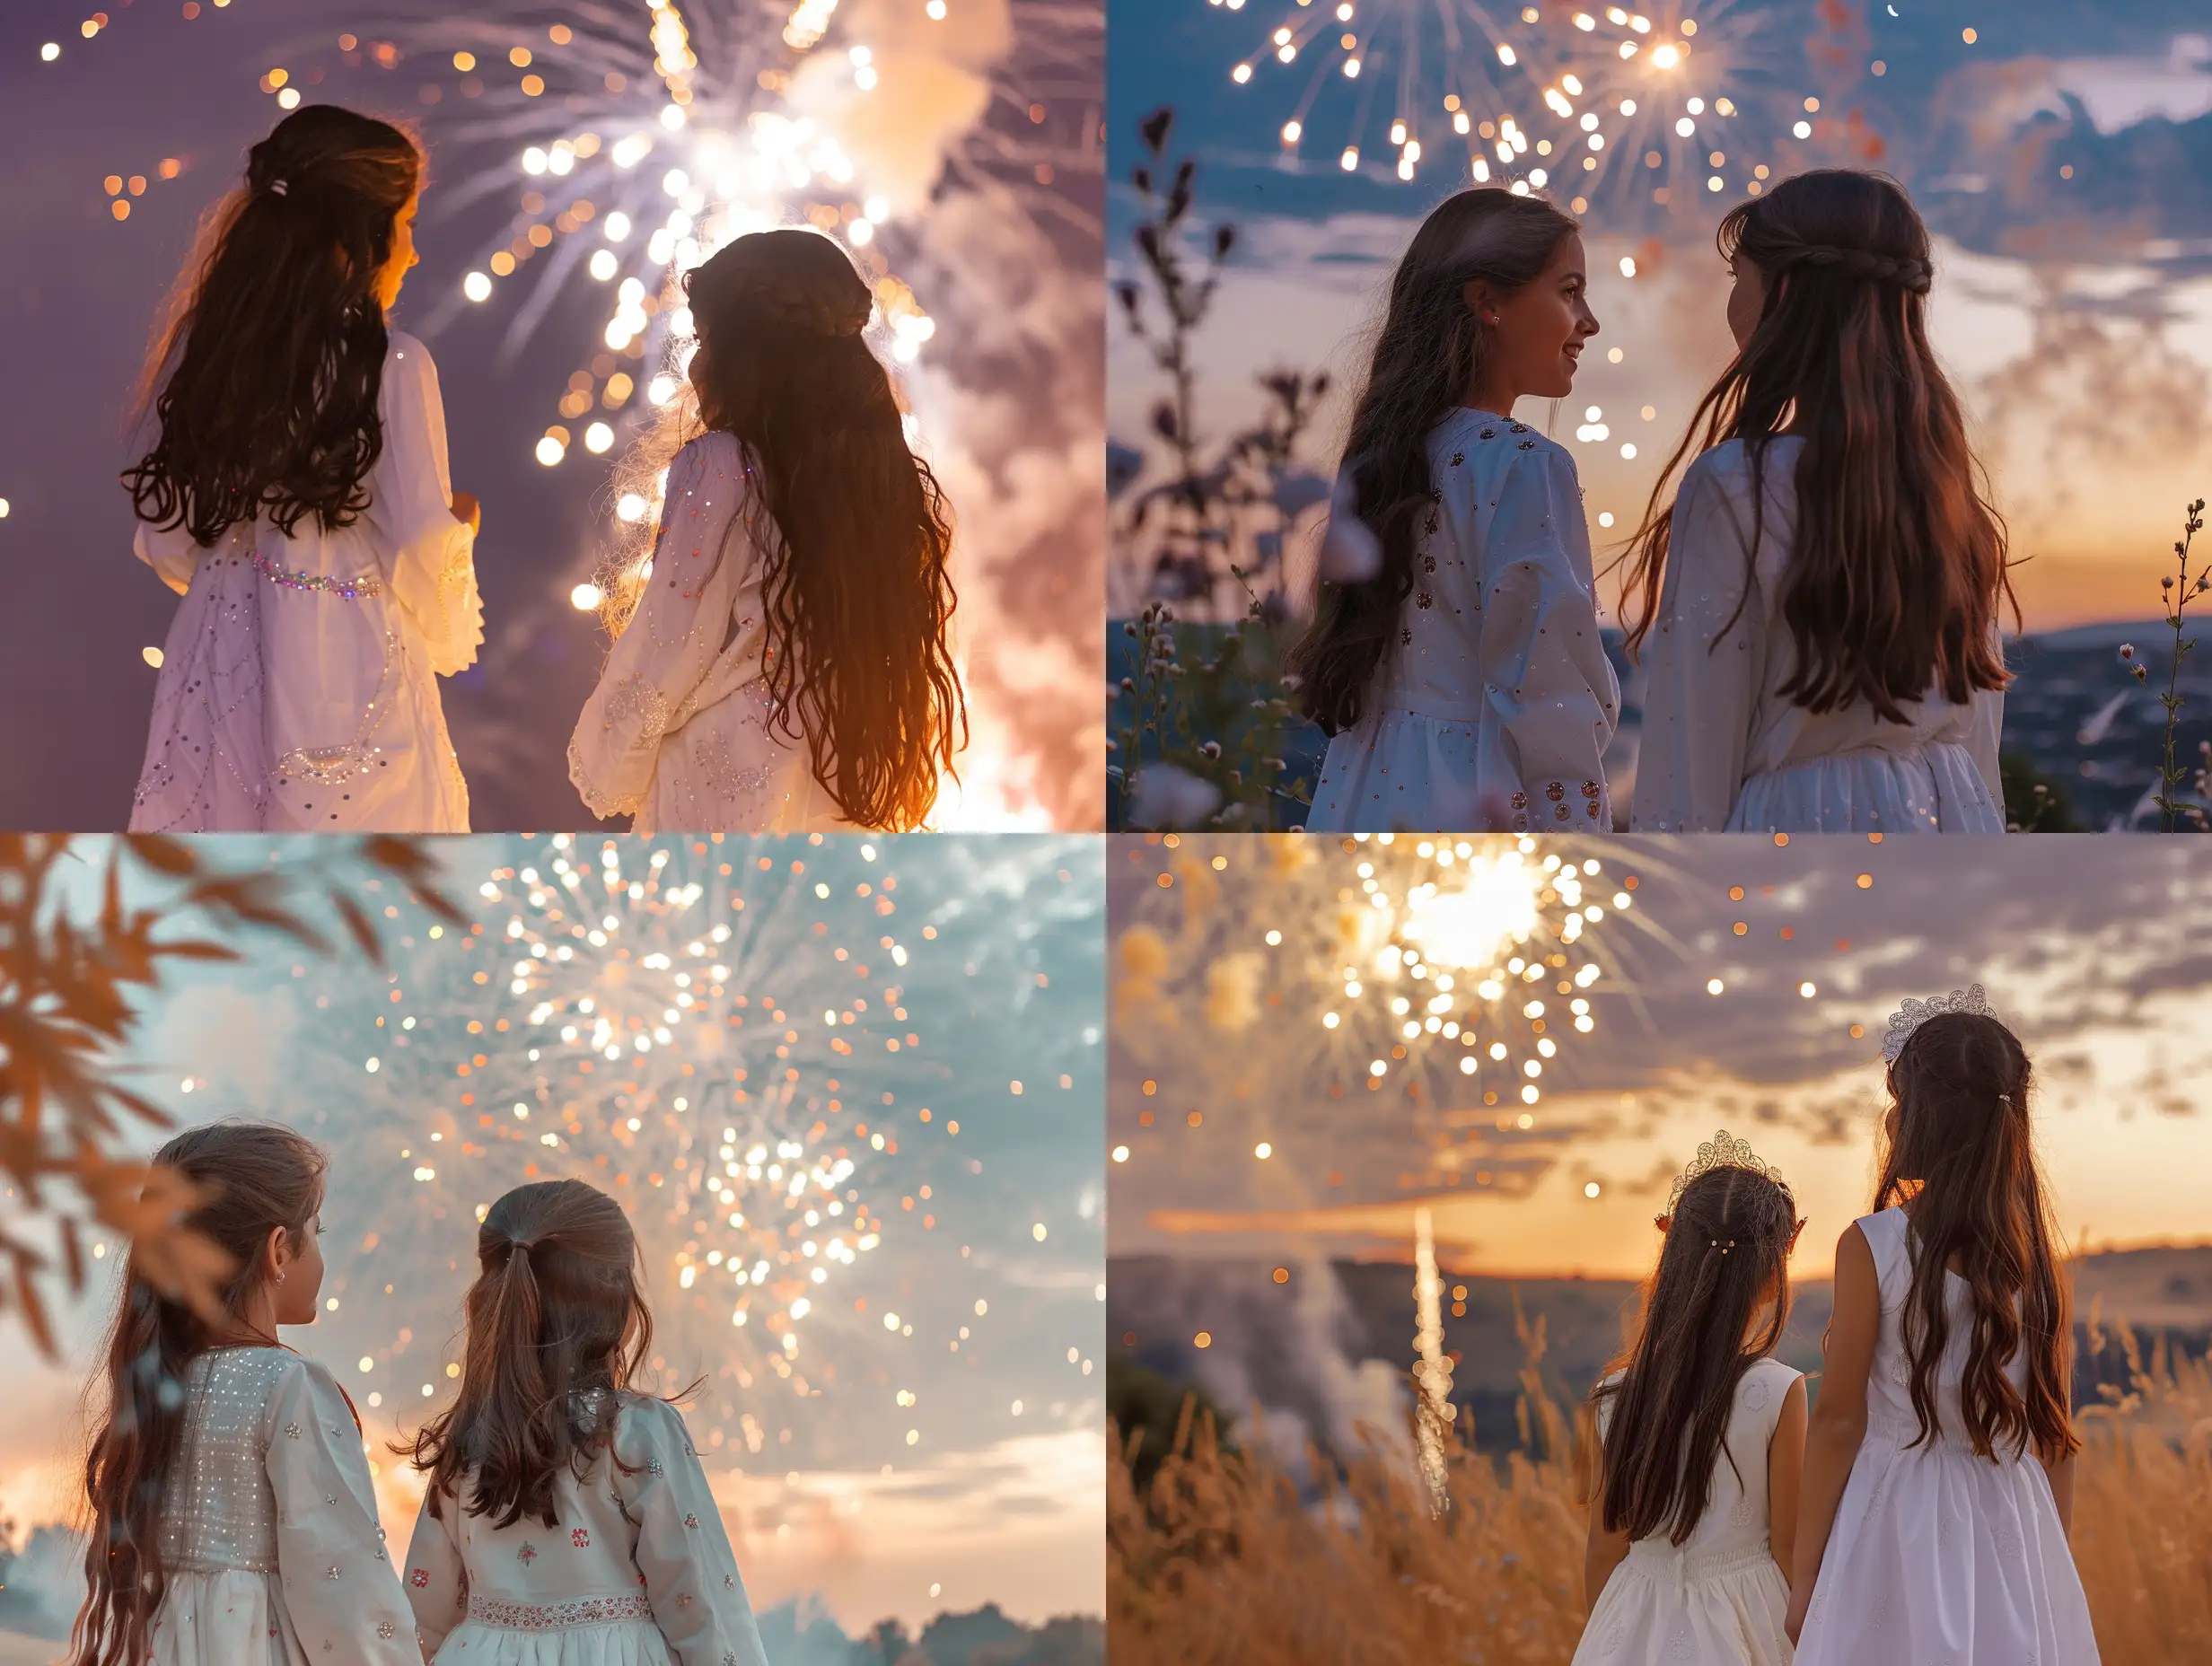 20-year-old girls in white Eid dresses, standing happily and looking at the fireworks in the sky, aspects of Eid Al-Fitr
Professional portrait photography, HD digital camera, contemporary era, warm color palette., Portrait, Realism, Keyshot, Normal perspective, Mirrorless Camera, Natural Light, Delight,